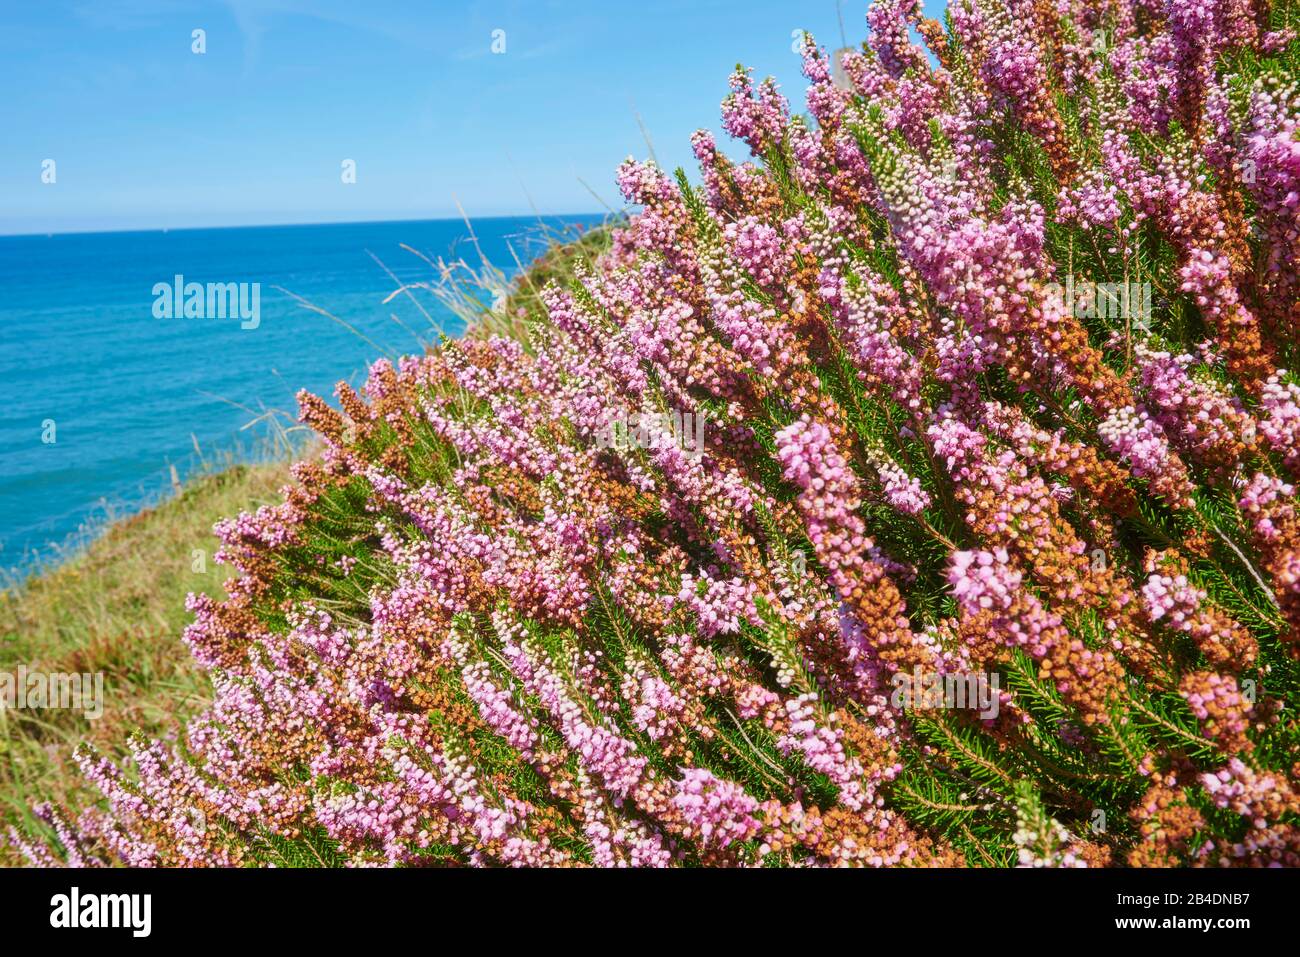 Blooming Spiek Heath (Erica spiculifolia) with the atlantic ocean in the background at the Camino del Norte, coastal path, Way of St. James, Camino de Stock Photo